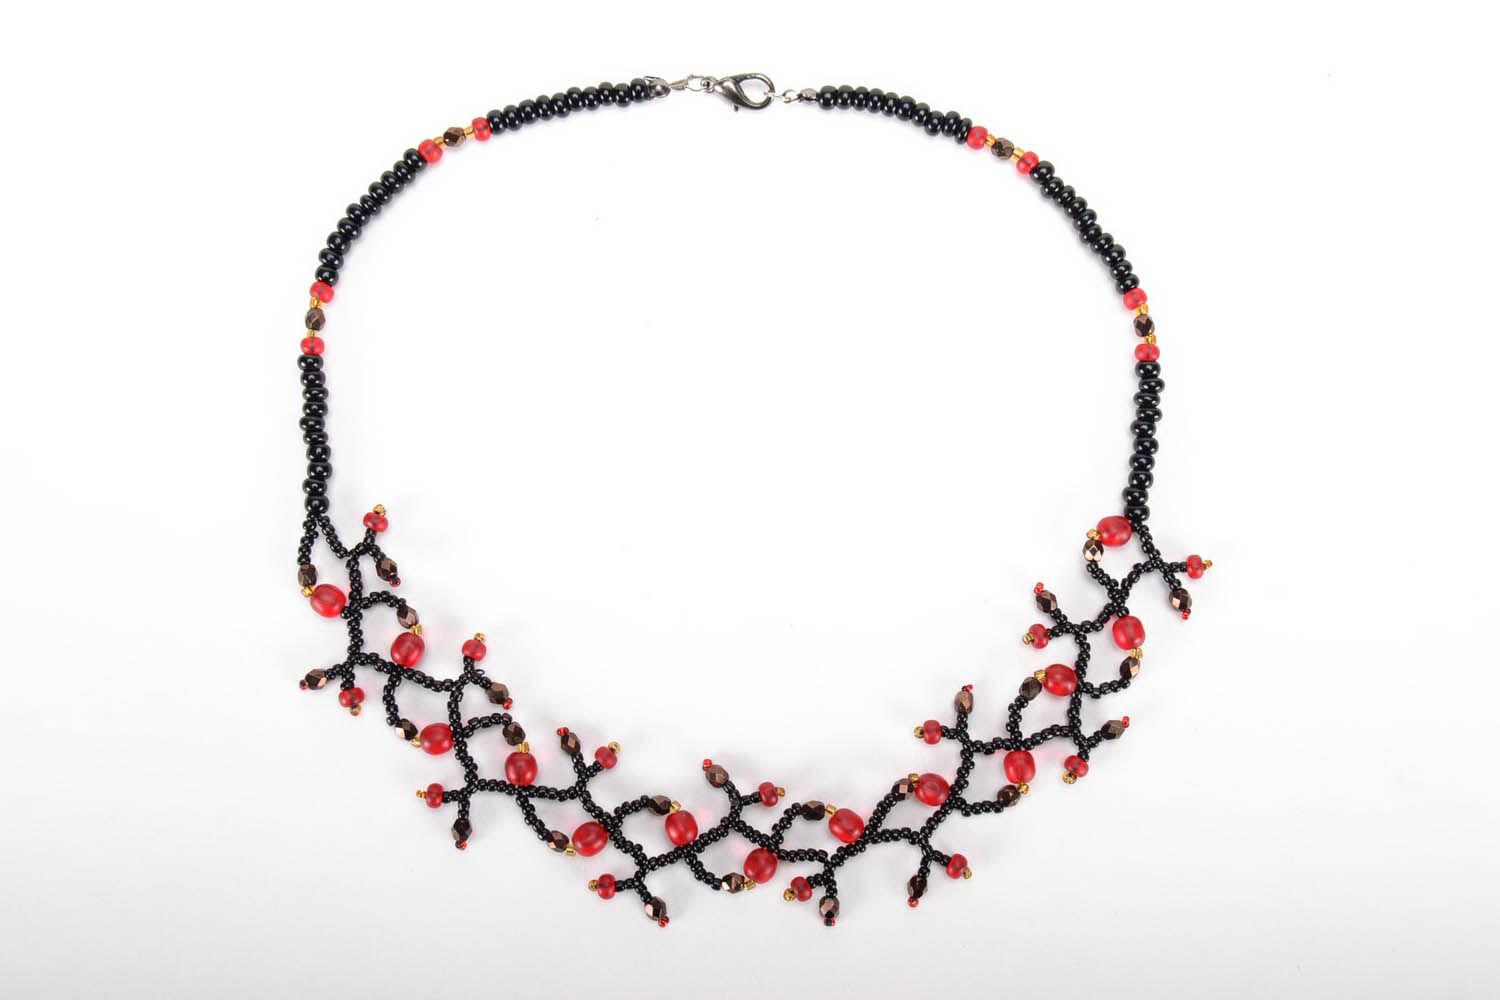 Black and red necklace made of beads photo 5